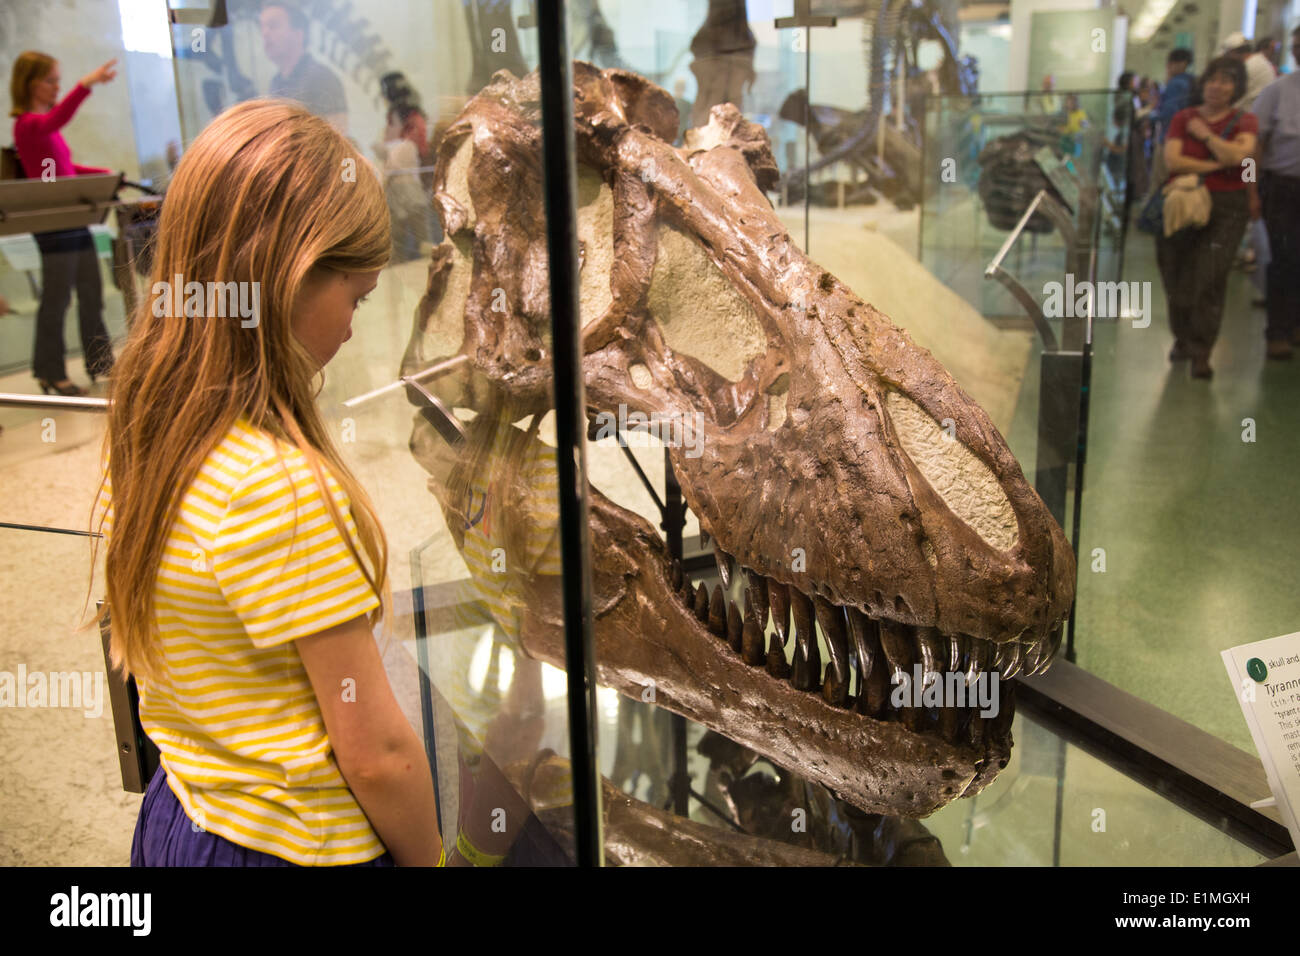 American Museum of Natural History, New York City Stock Photo